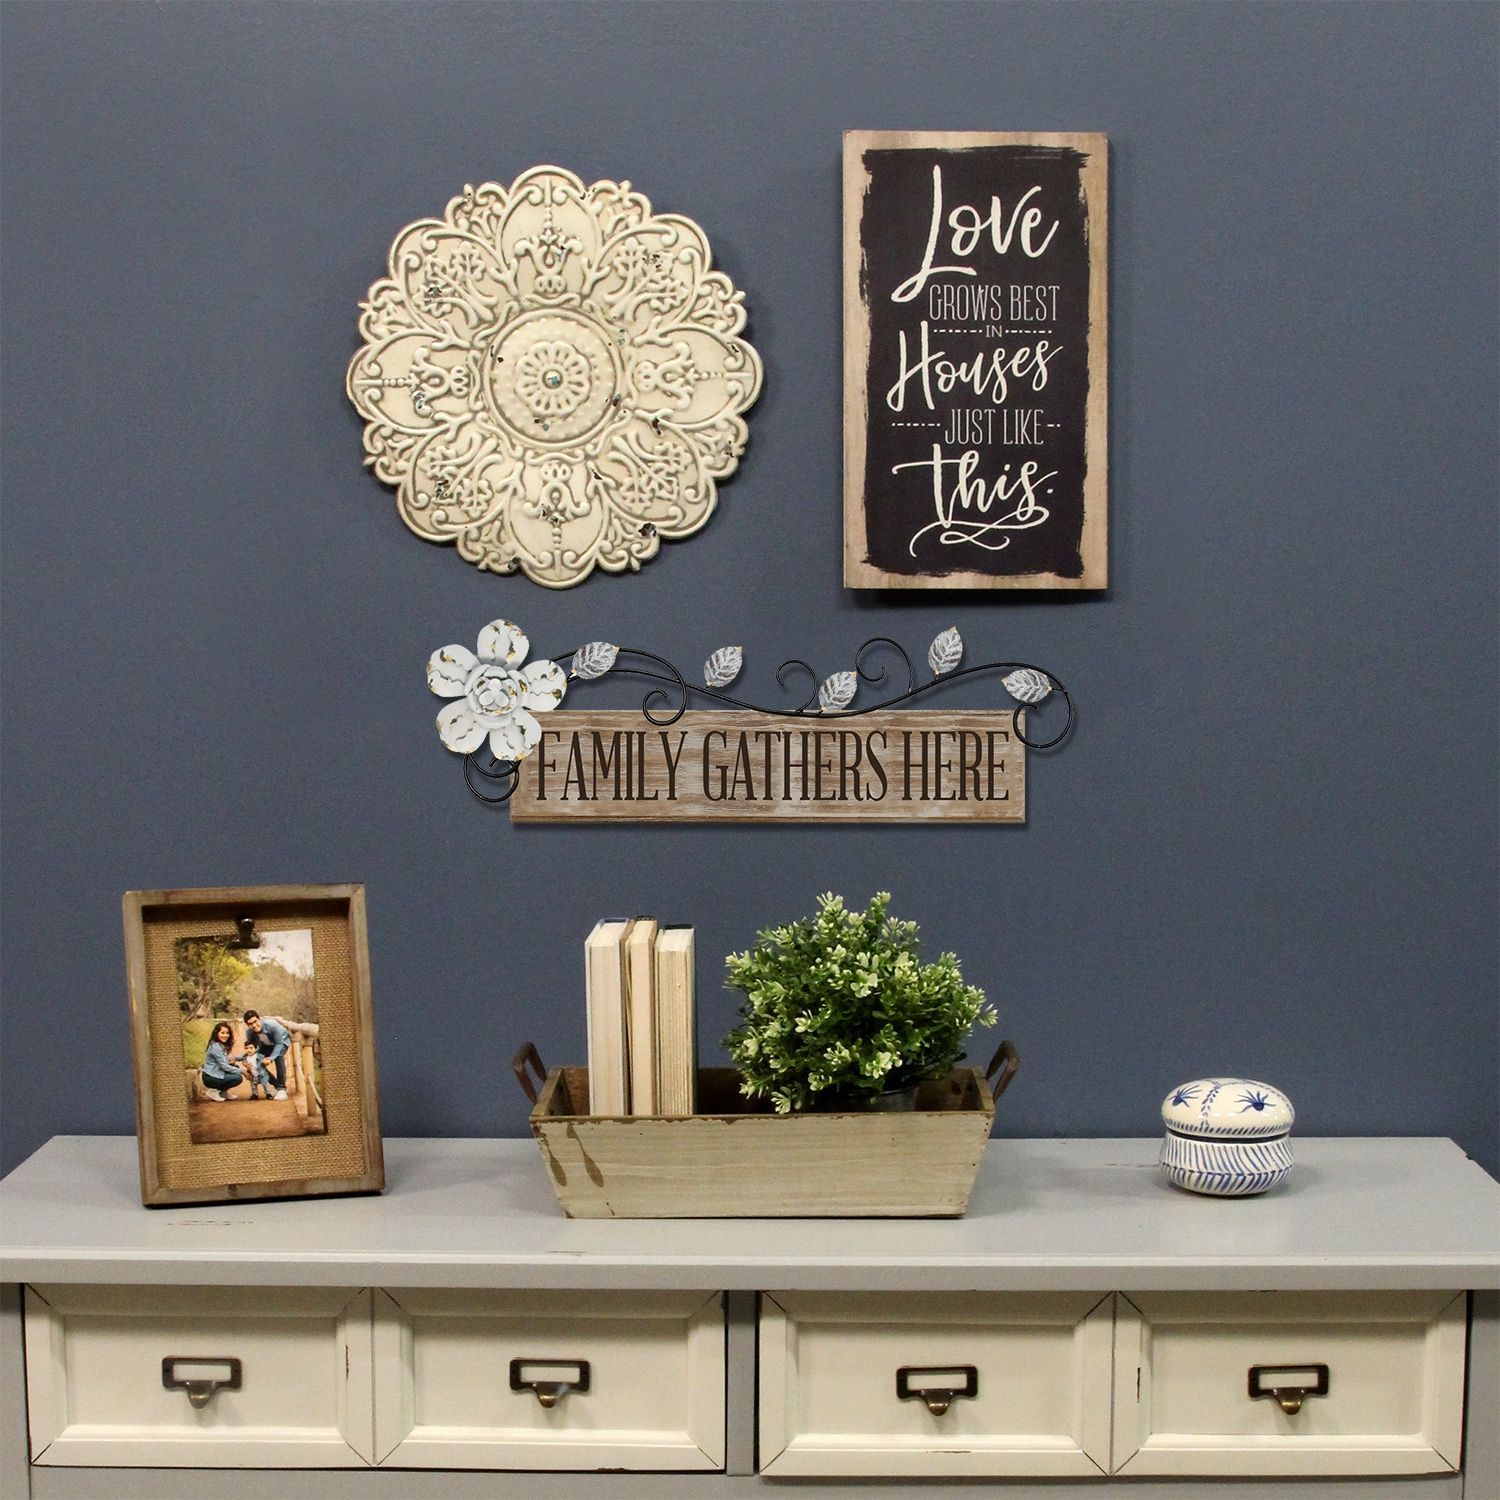 Stratton Home Decor Small Metal Medallion Wall Decor In 2019 Pertaining To Small Medallion Wall Decor (View 17 of 30)